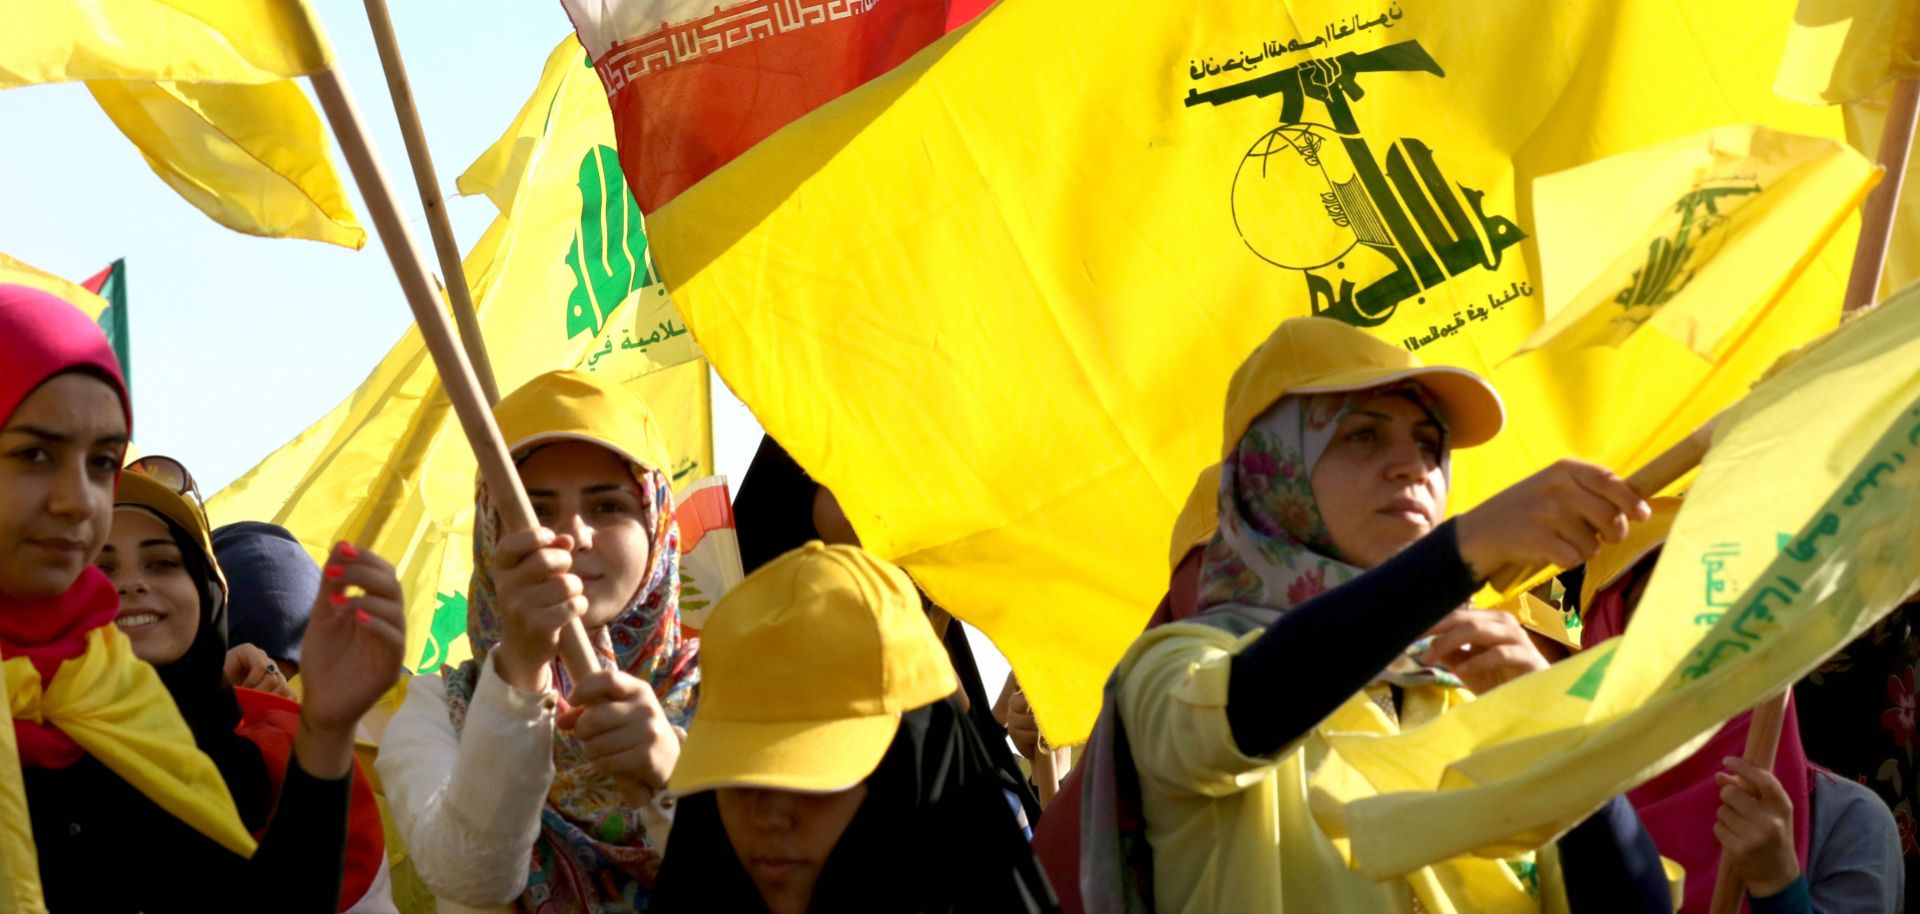 Hezbollah supporters wave the militant group's flag at a rally in Lebanon in August 2016. With its vast network of operatives scattered around the world, Hezbollah has demonstrated its ability to stage attacks in unexpected locations to further its cause.